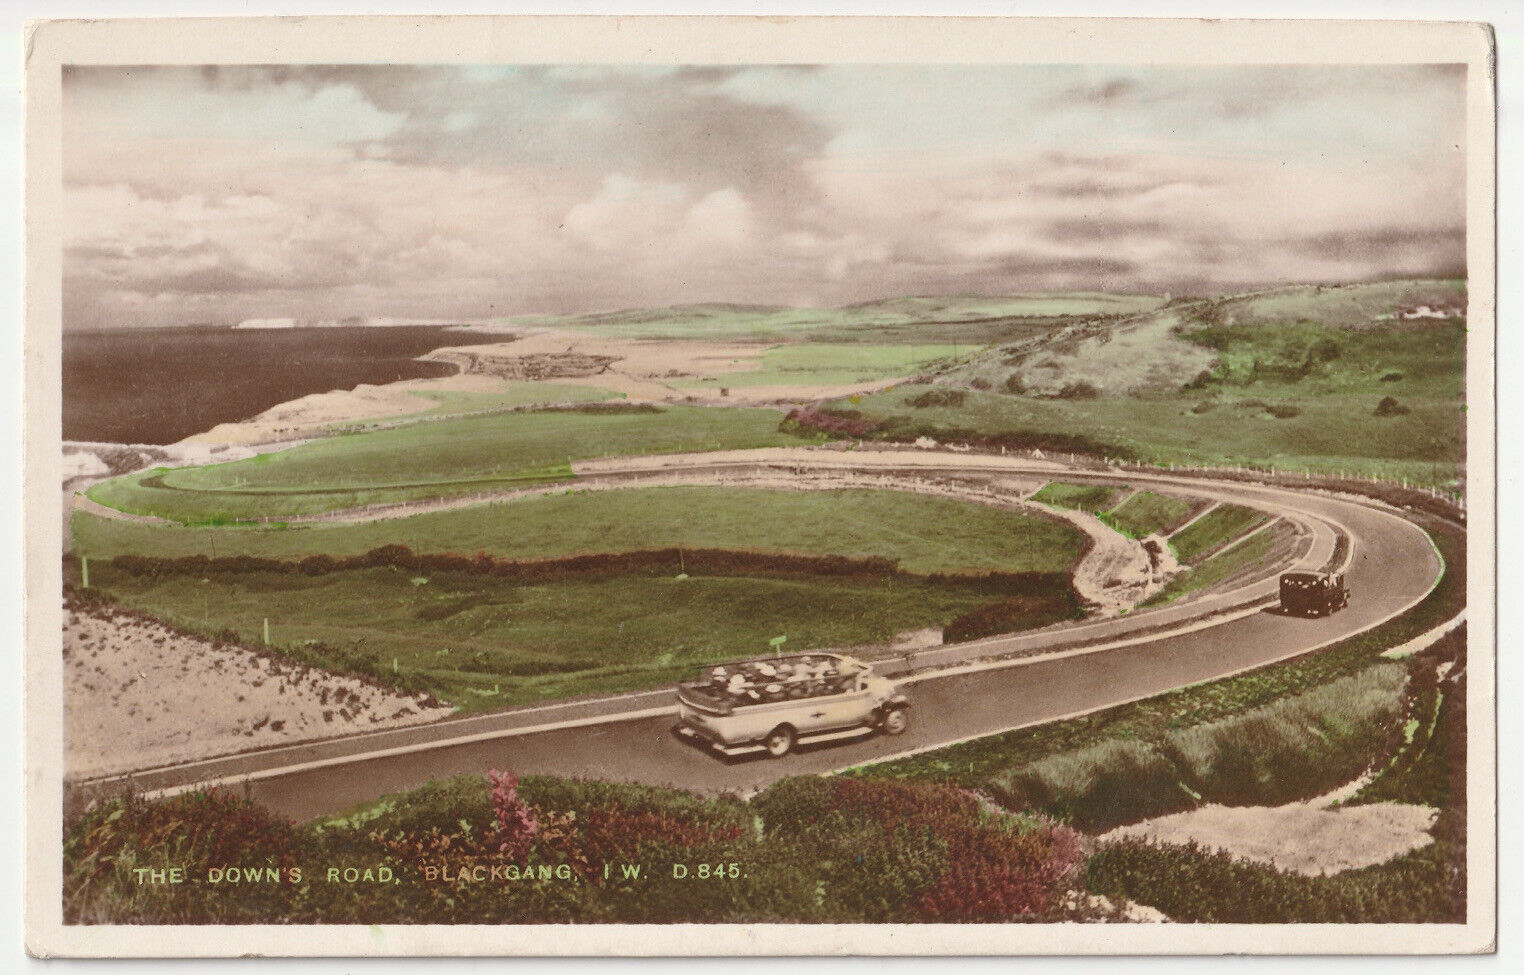 c1930s RPPC The Downs Road Blackgang Isle of Wight Colored Photo Postcard